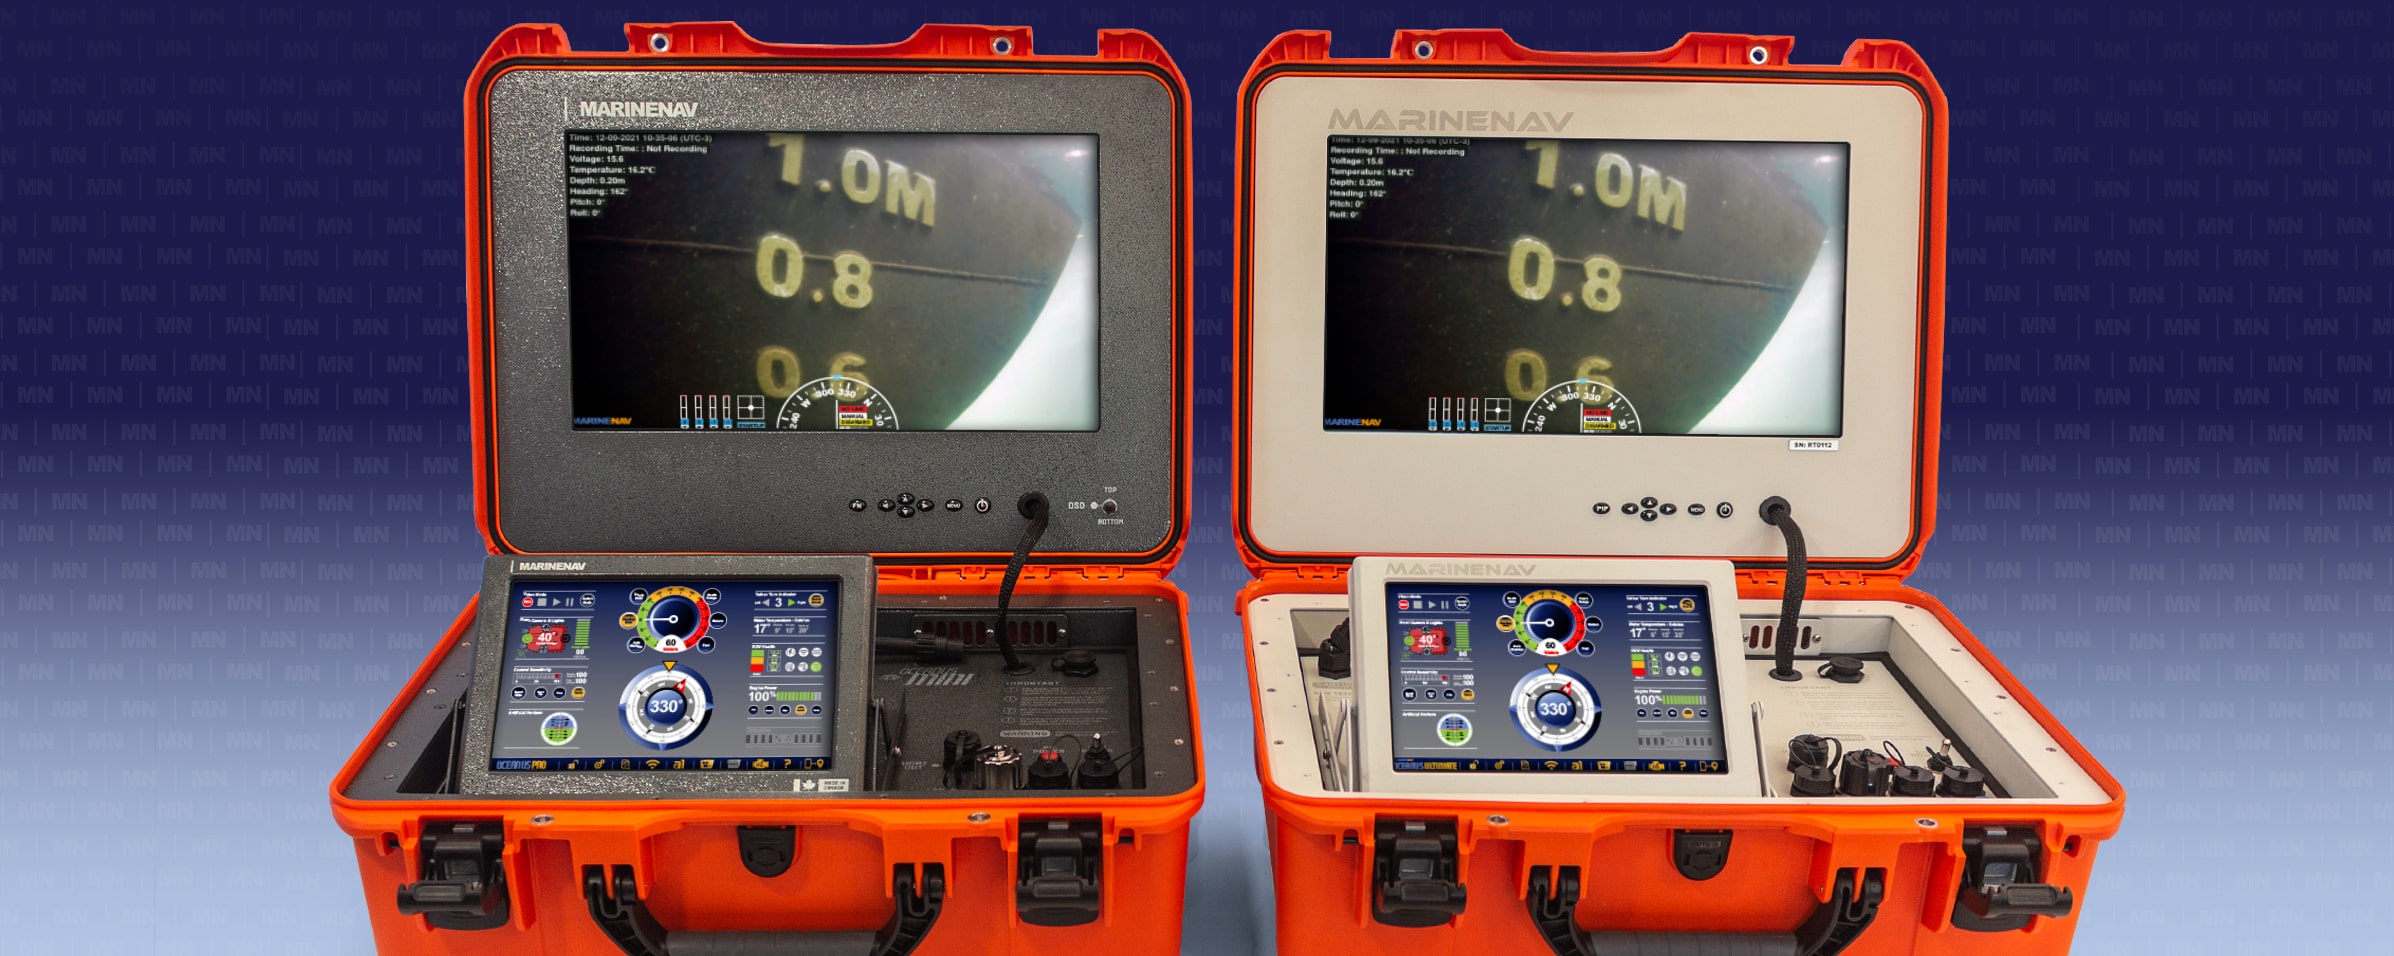 The Topside Control Case is the operational hub of all MarineNav ROV systems. Pictured are topsides for the Oceanus Mini/Pro and Oceanus Ultimate ROV systems